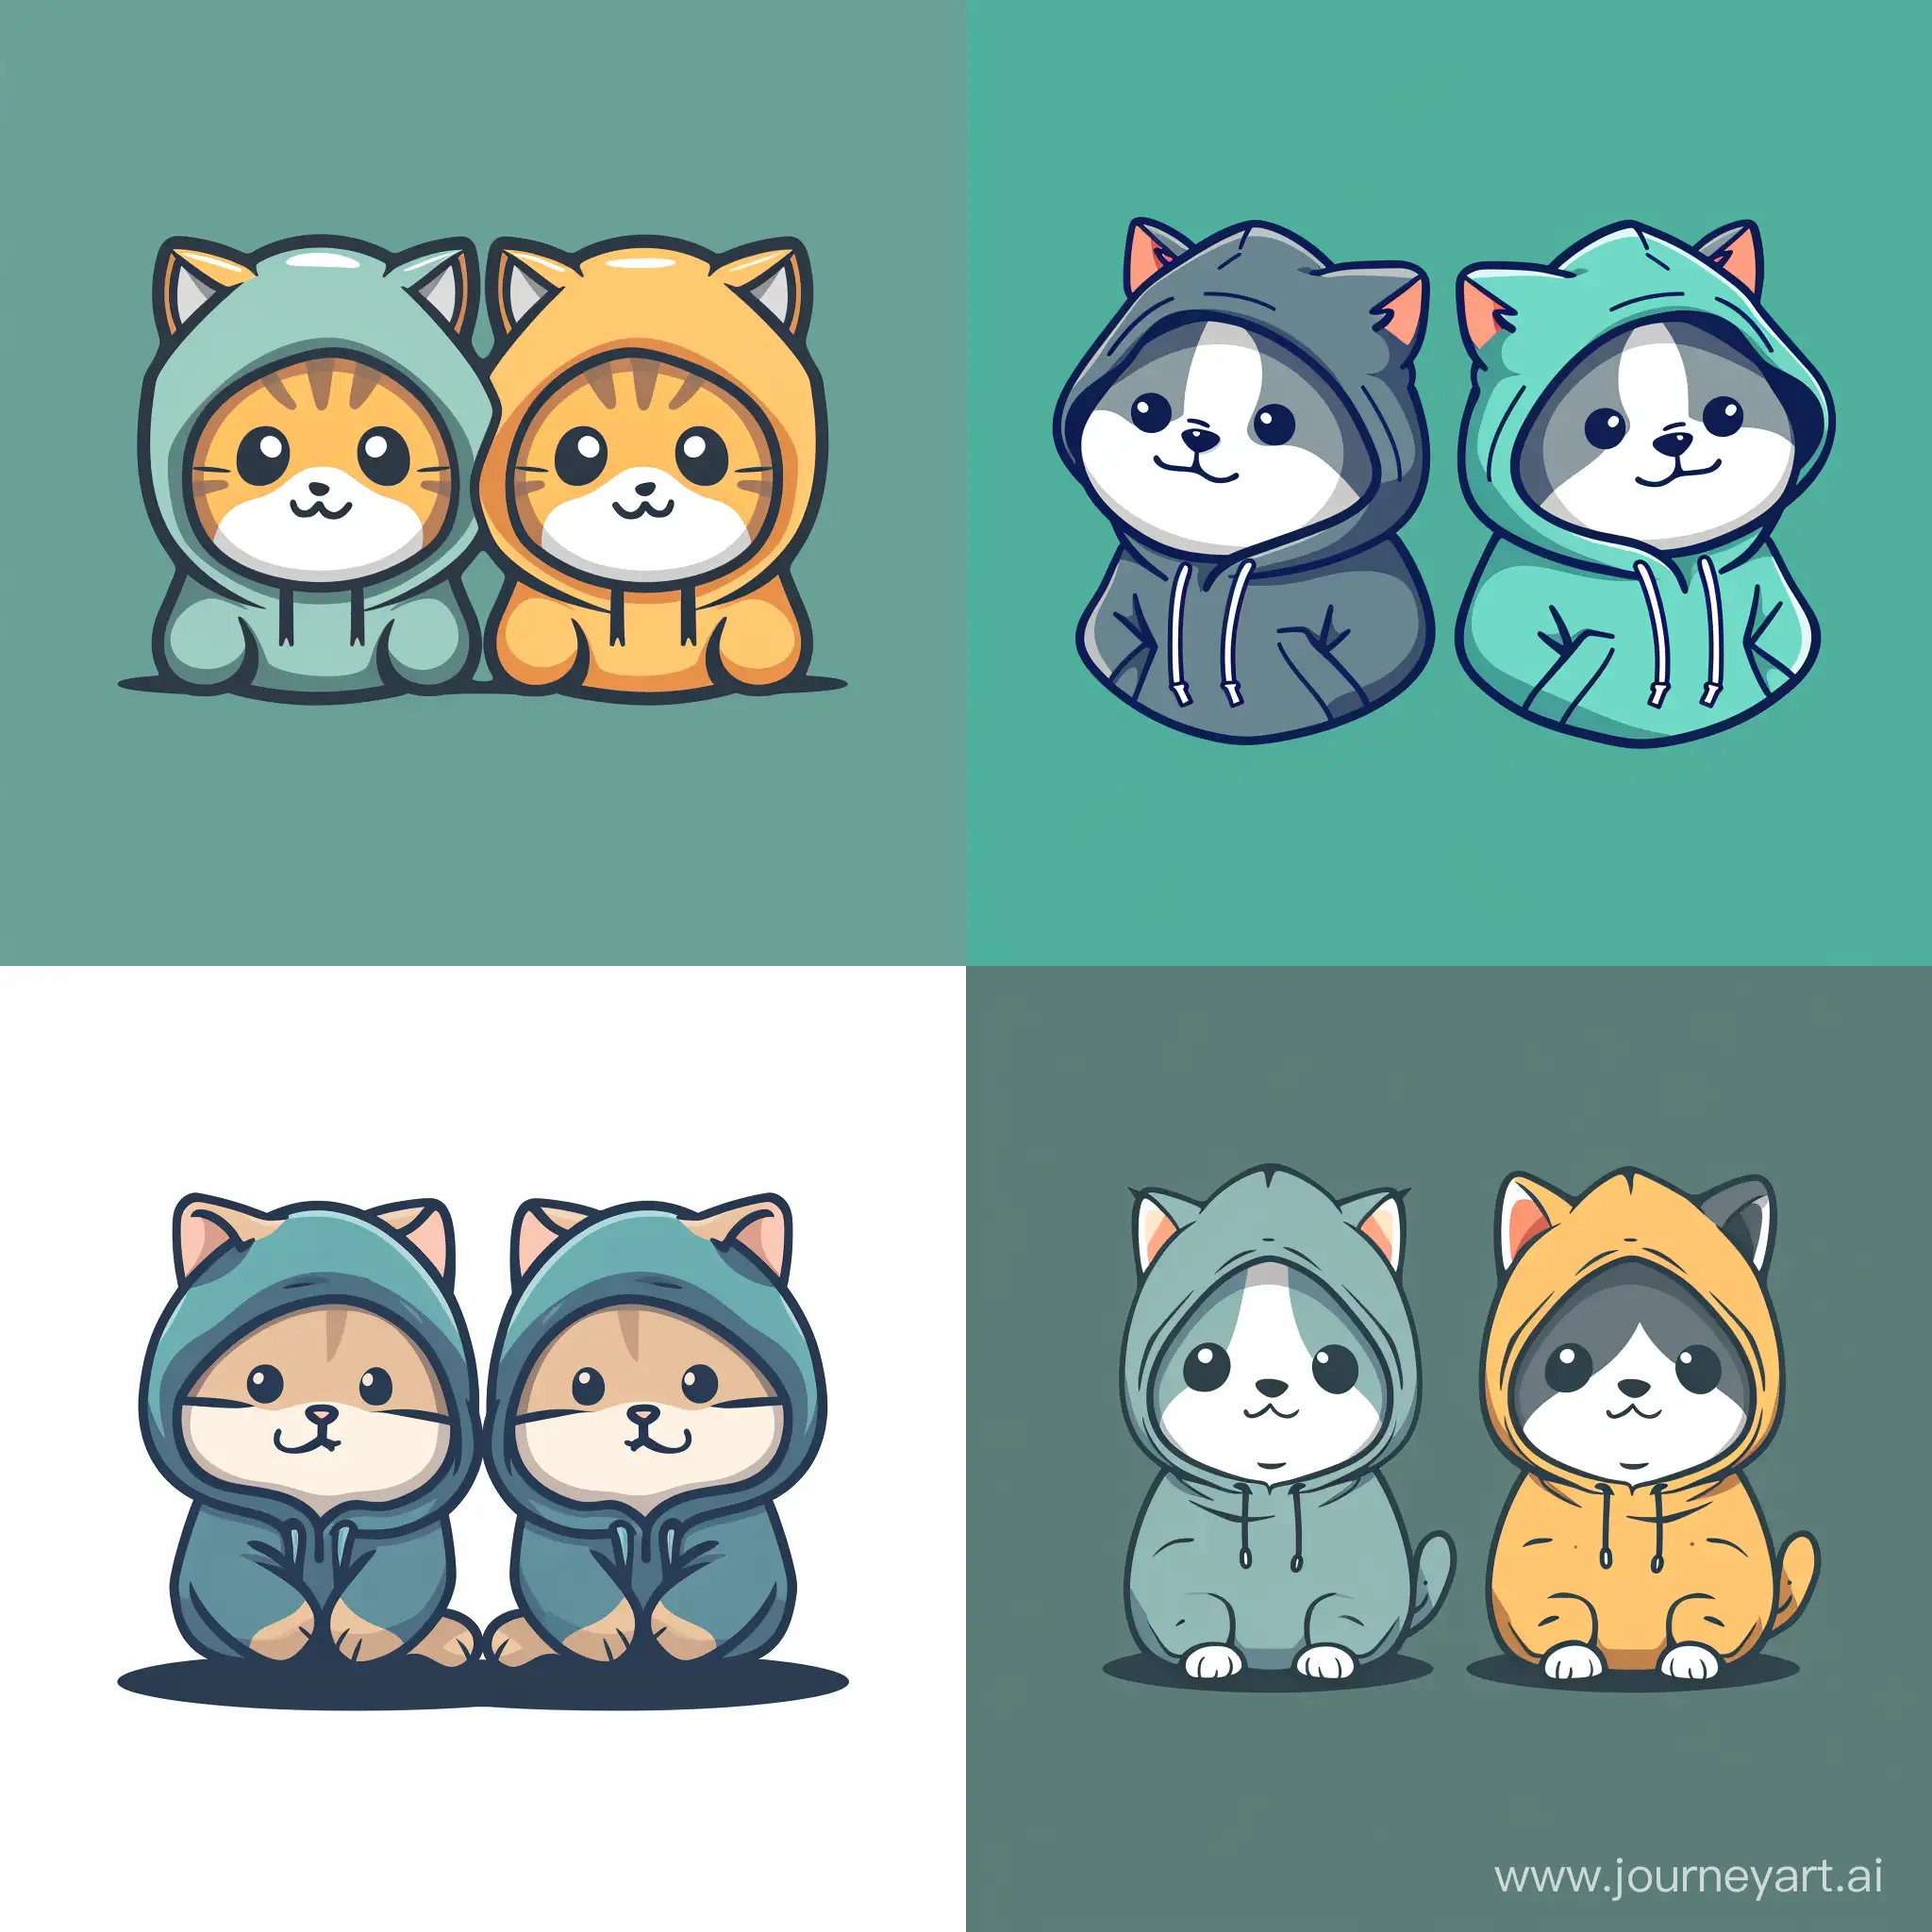 Minimalistic cartoon logo two cute cats wearing hoodies, in the style of minimalism, adorable, modern, simple, charming.